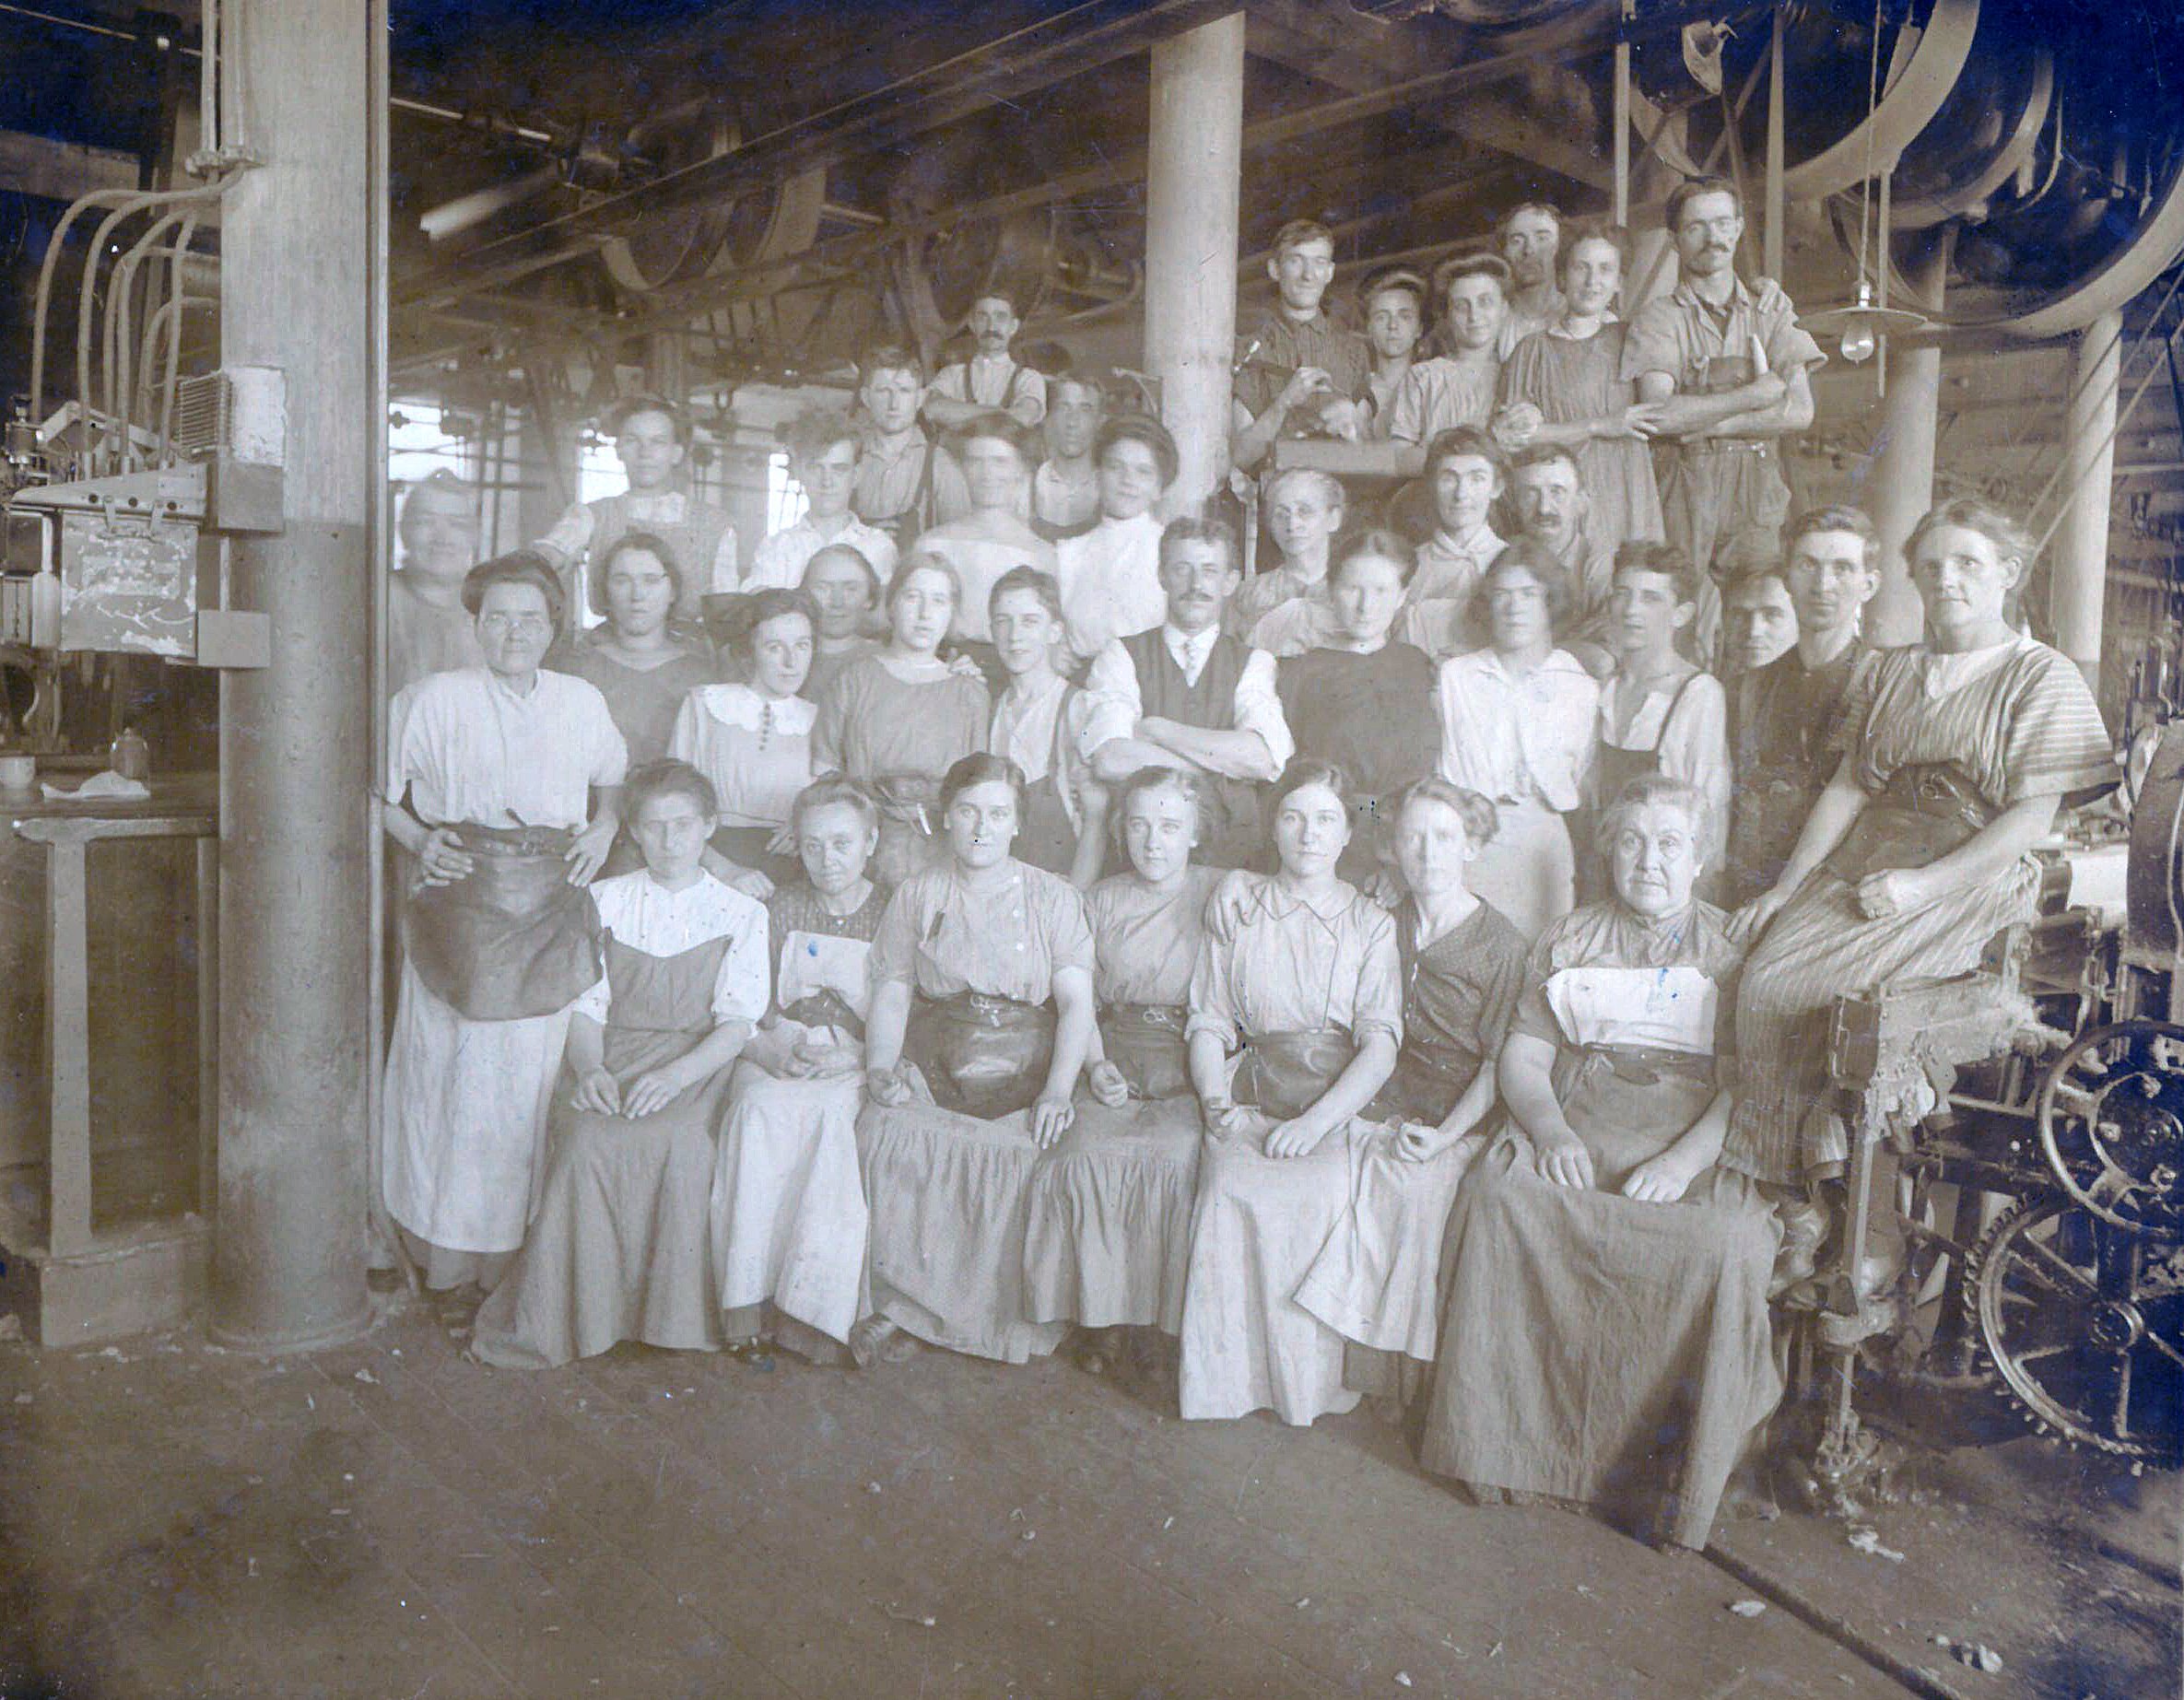 mill workers